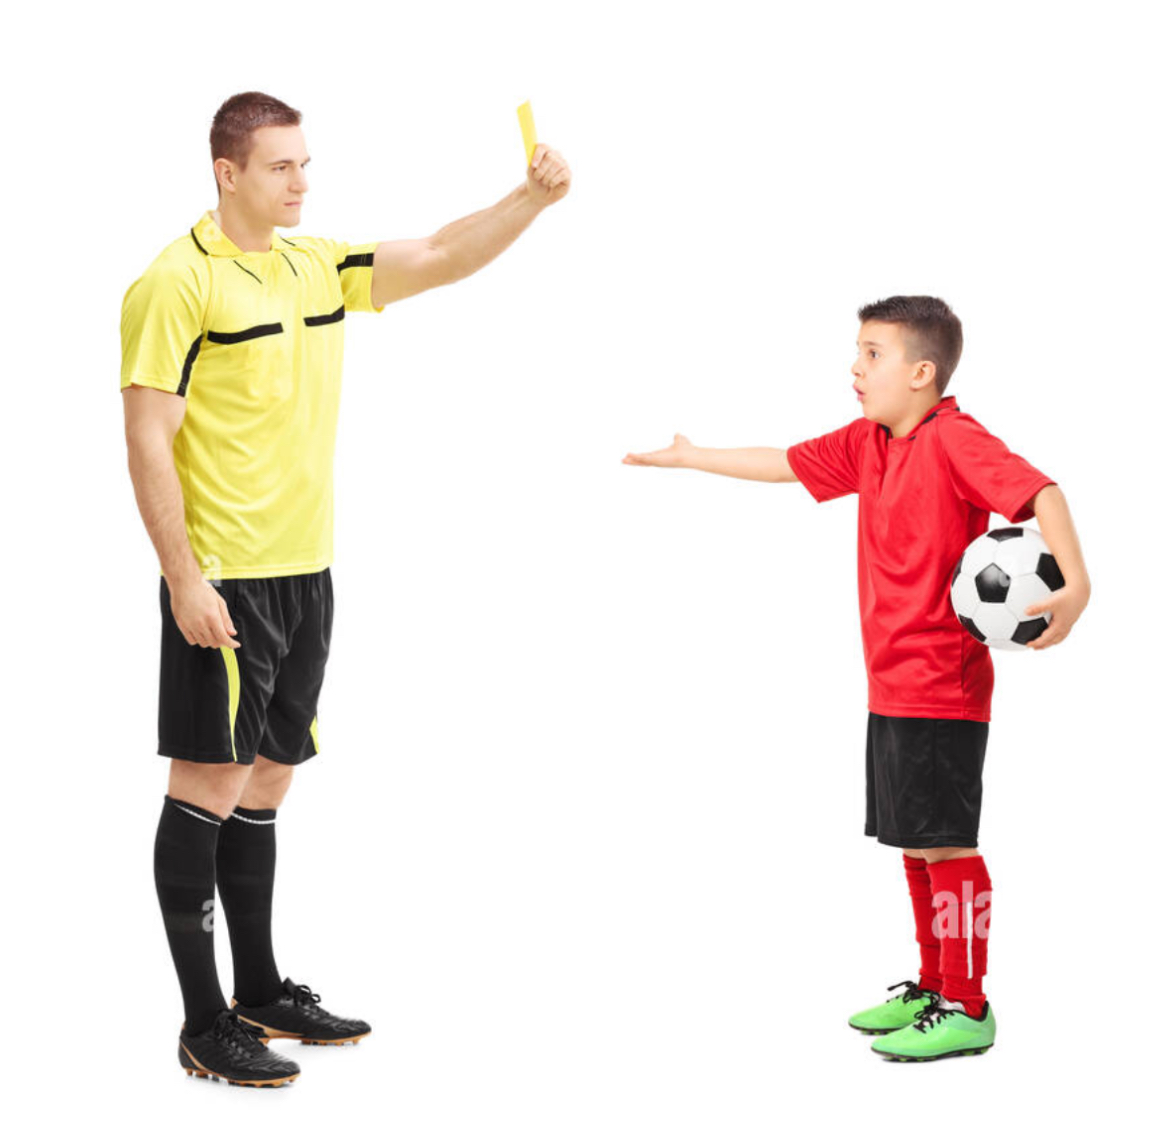 “You’re the one who should get a yellow card, ref! “